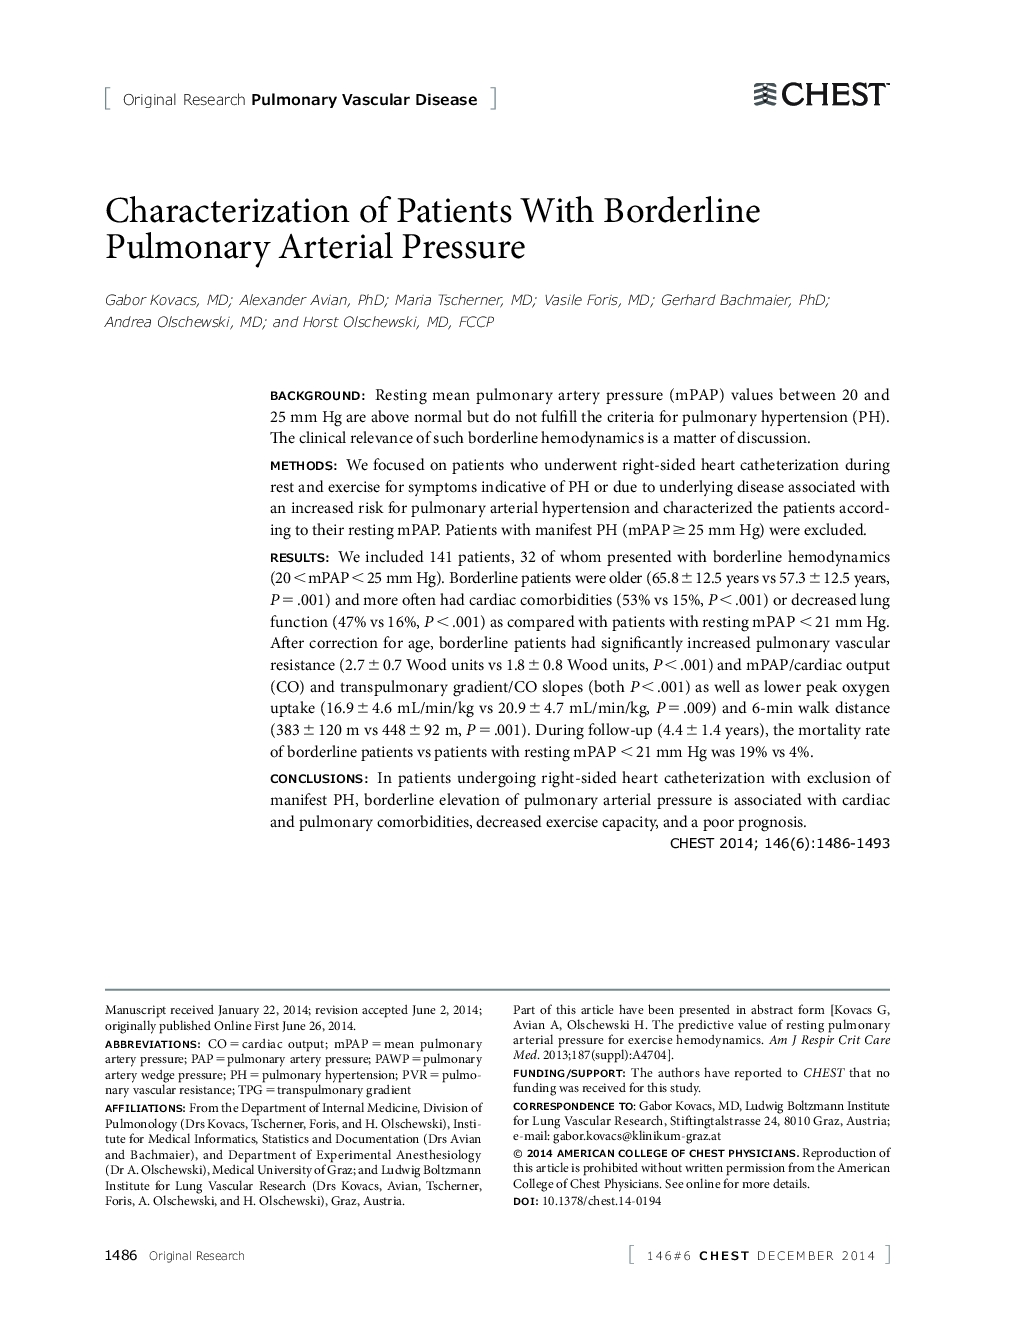 Characterization of Patients With Borderline Pulmonary Arterial Pressure